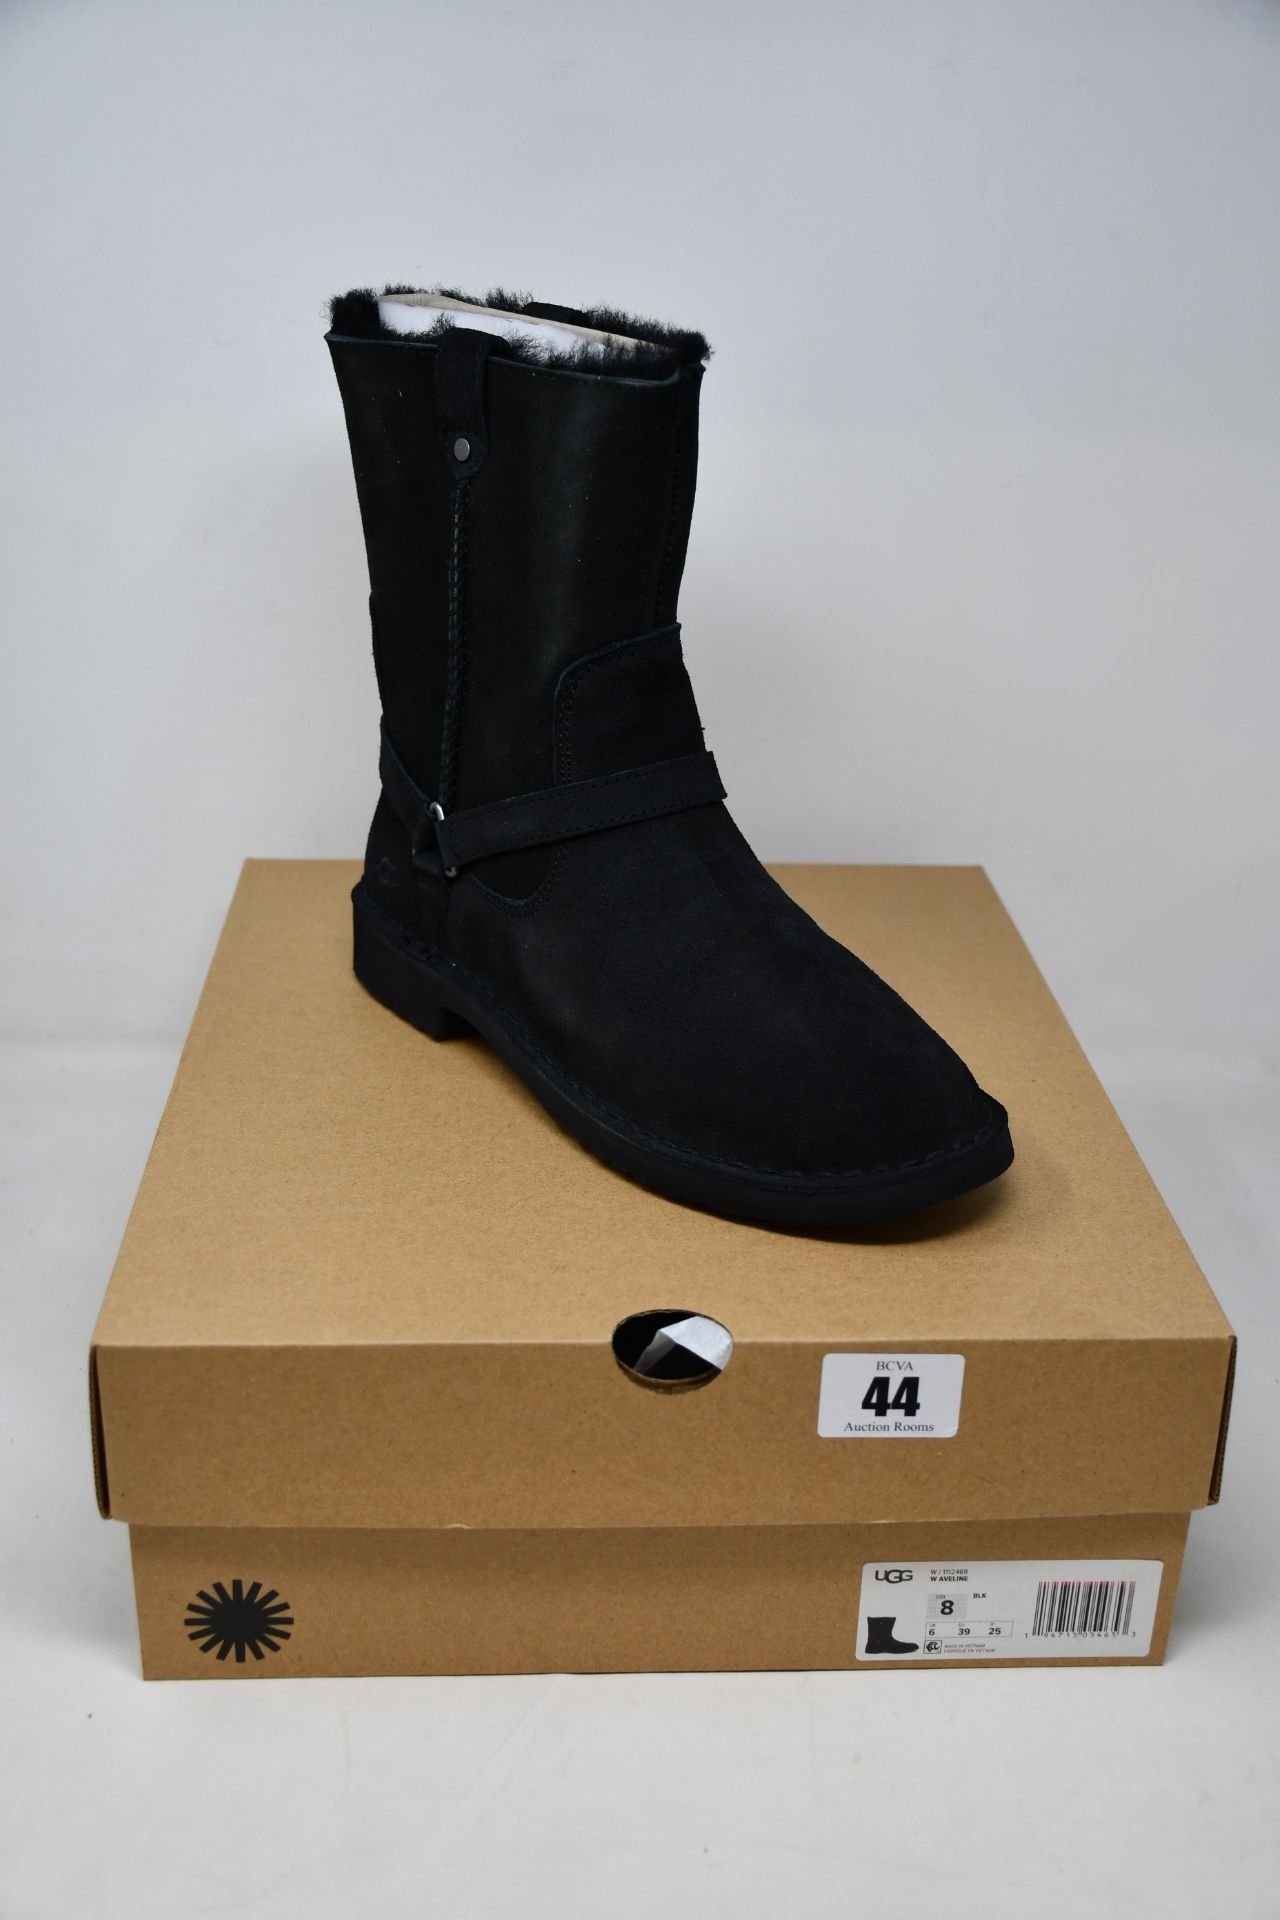 A pair of as new Ugg Aveline boots (UK 6).